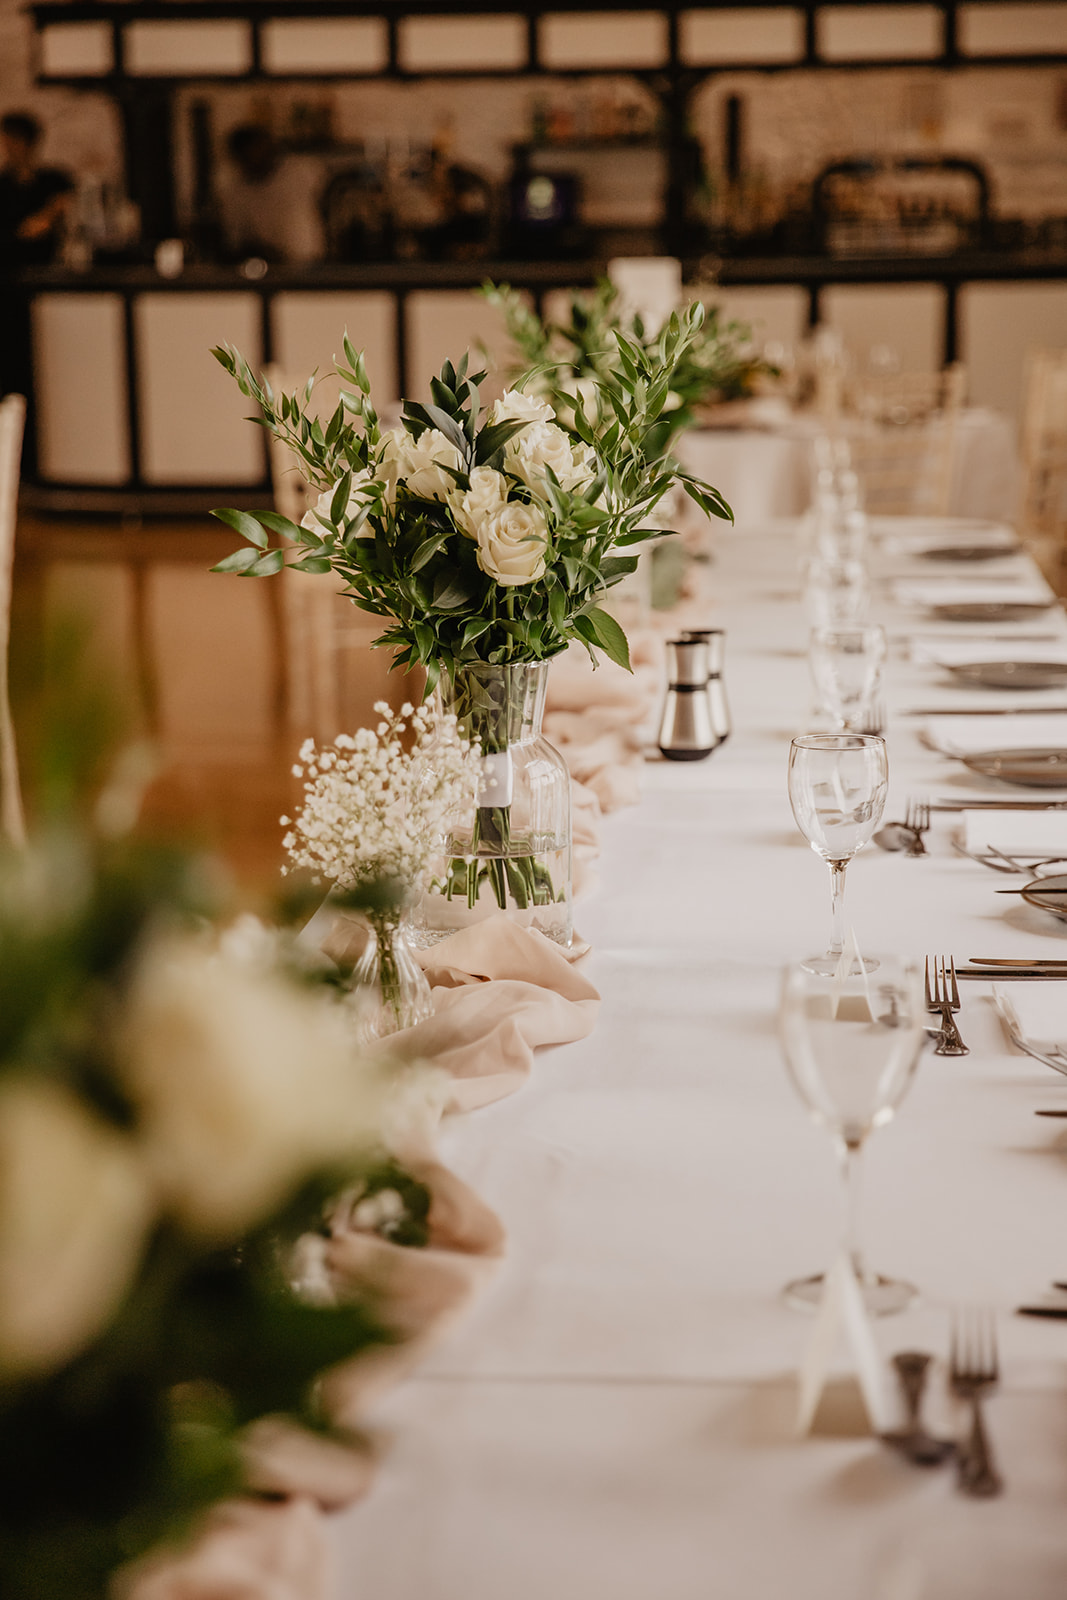 Wedding reception at a Field Place Manor House Wedding in Worthing, Sussex. By Olive Joy Photography